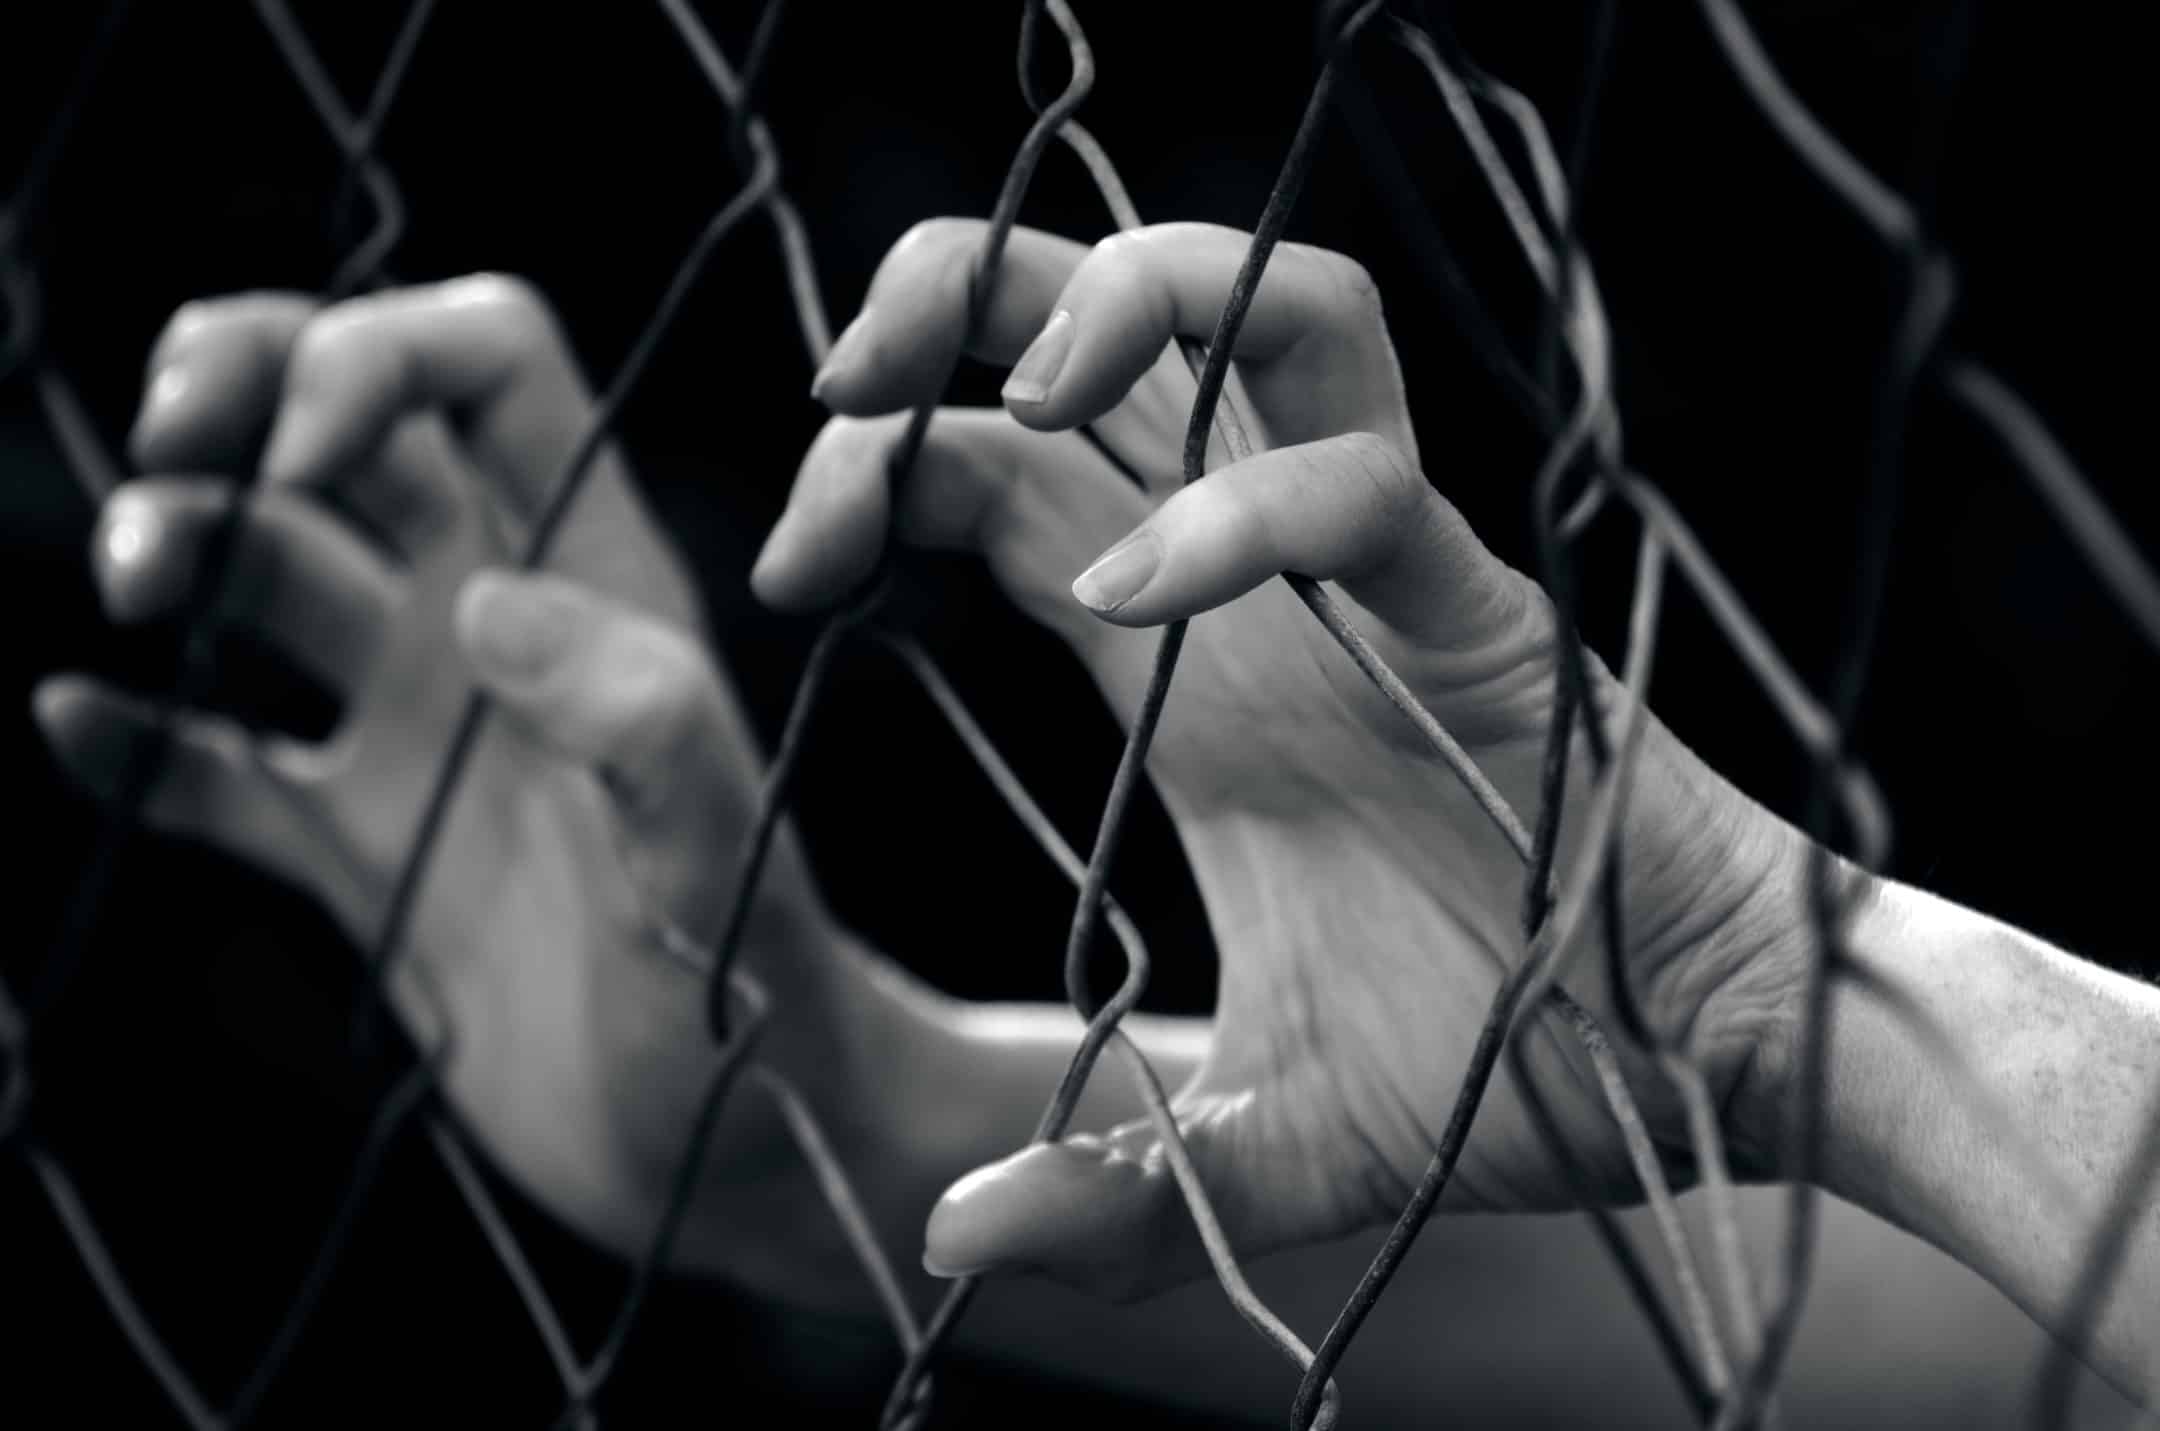 hands holding on to a cage cell